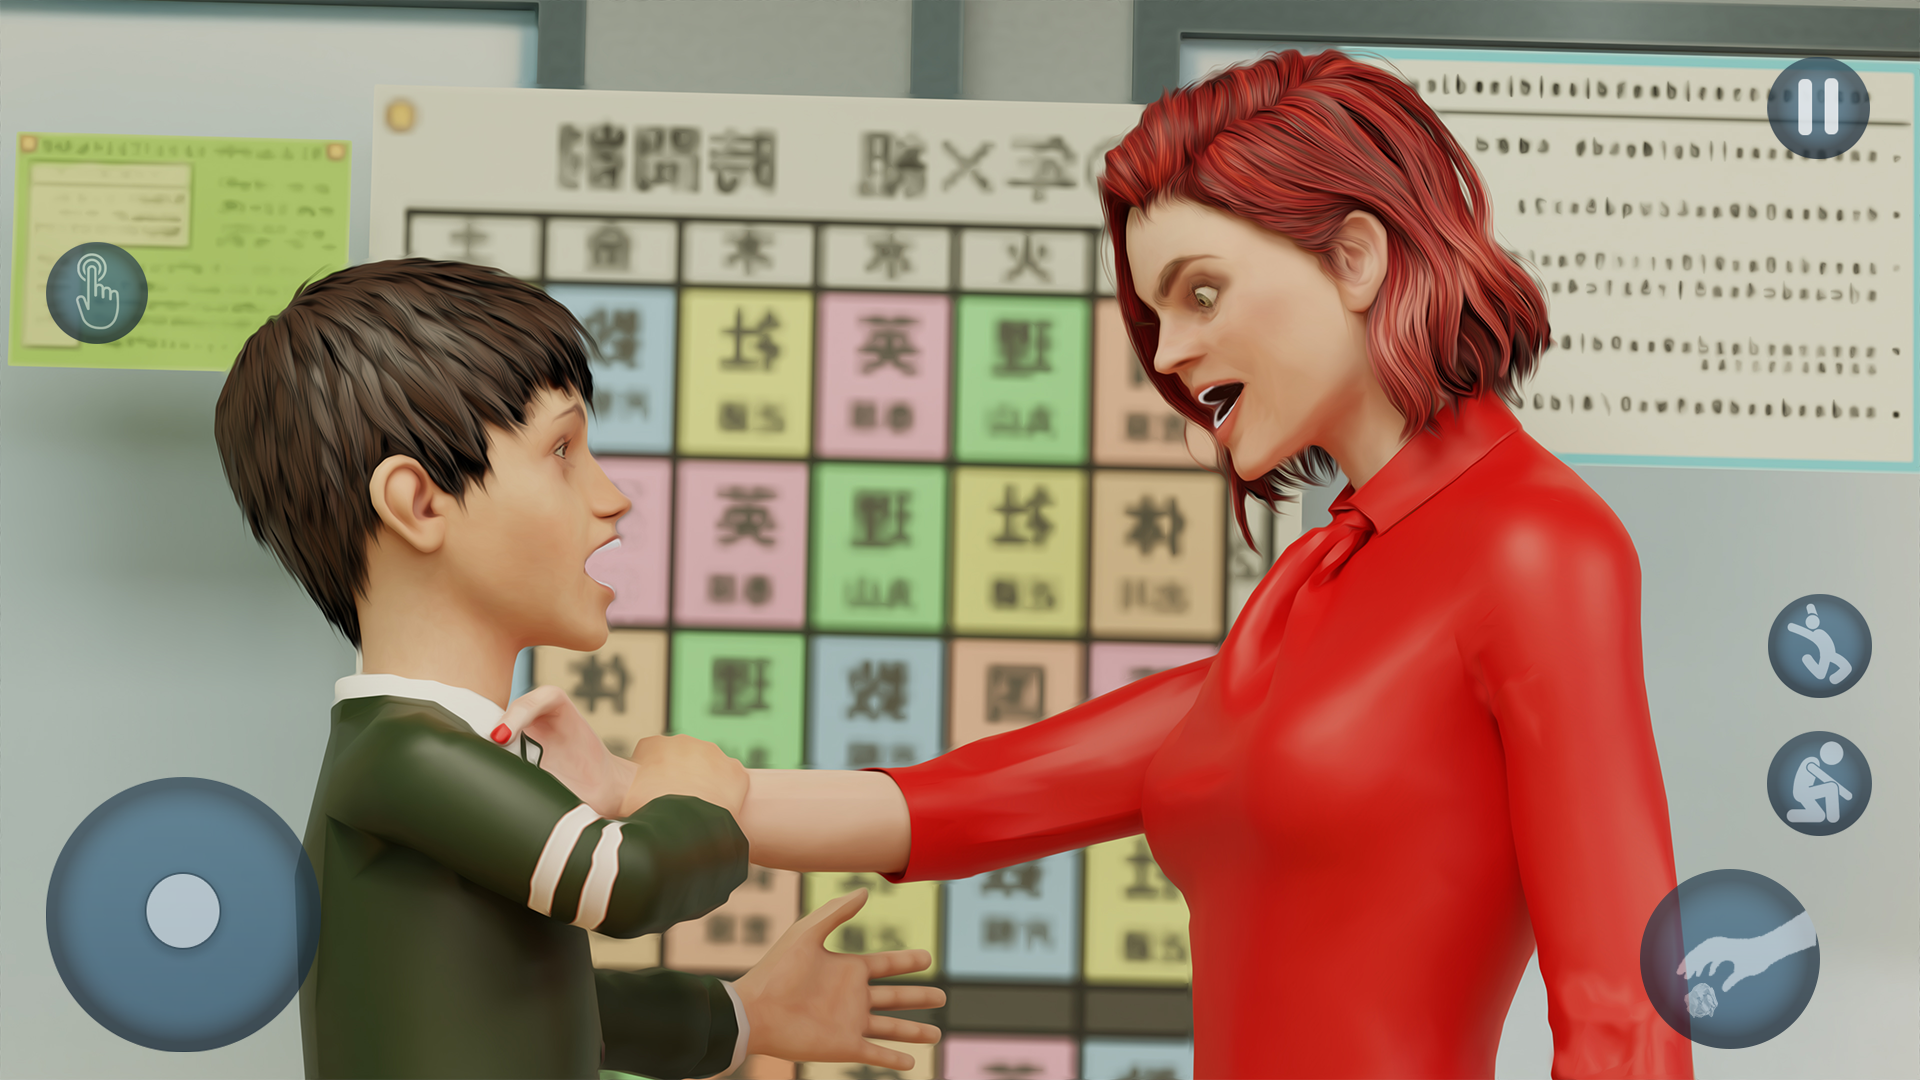 Crazy Scary Evil Teacher 3D - Spooky Game - APK Download for Android